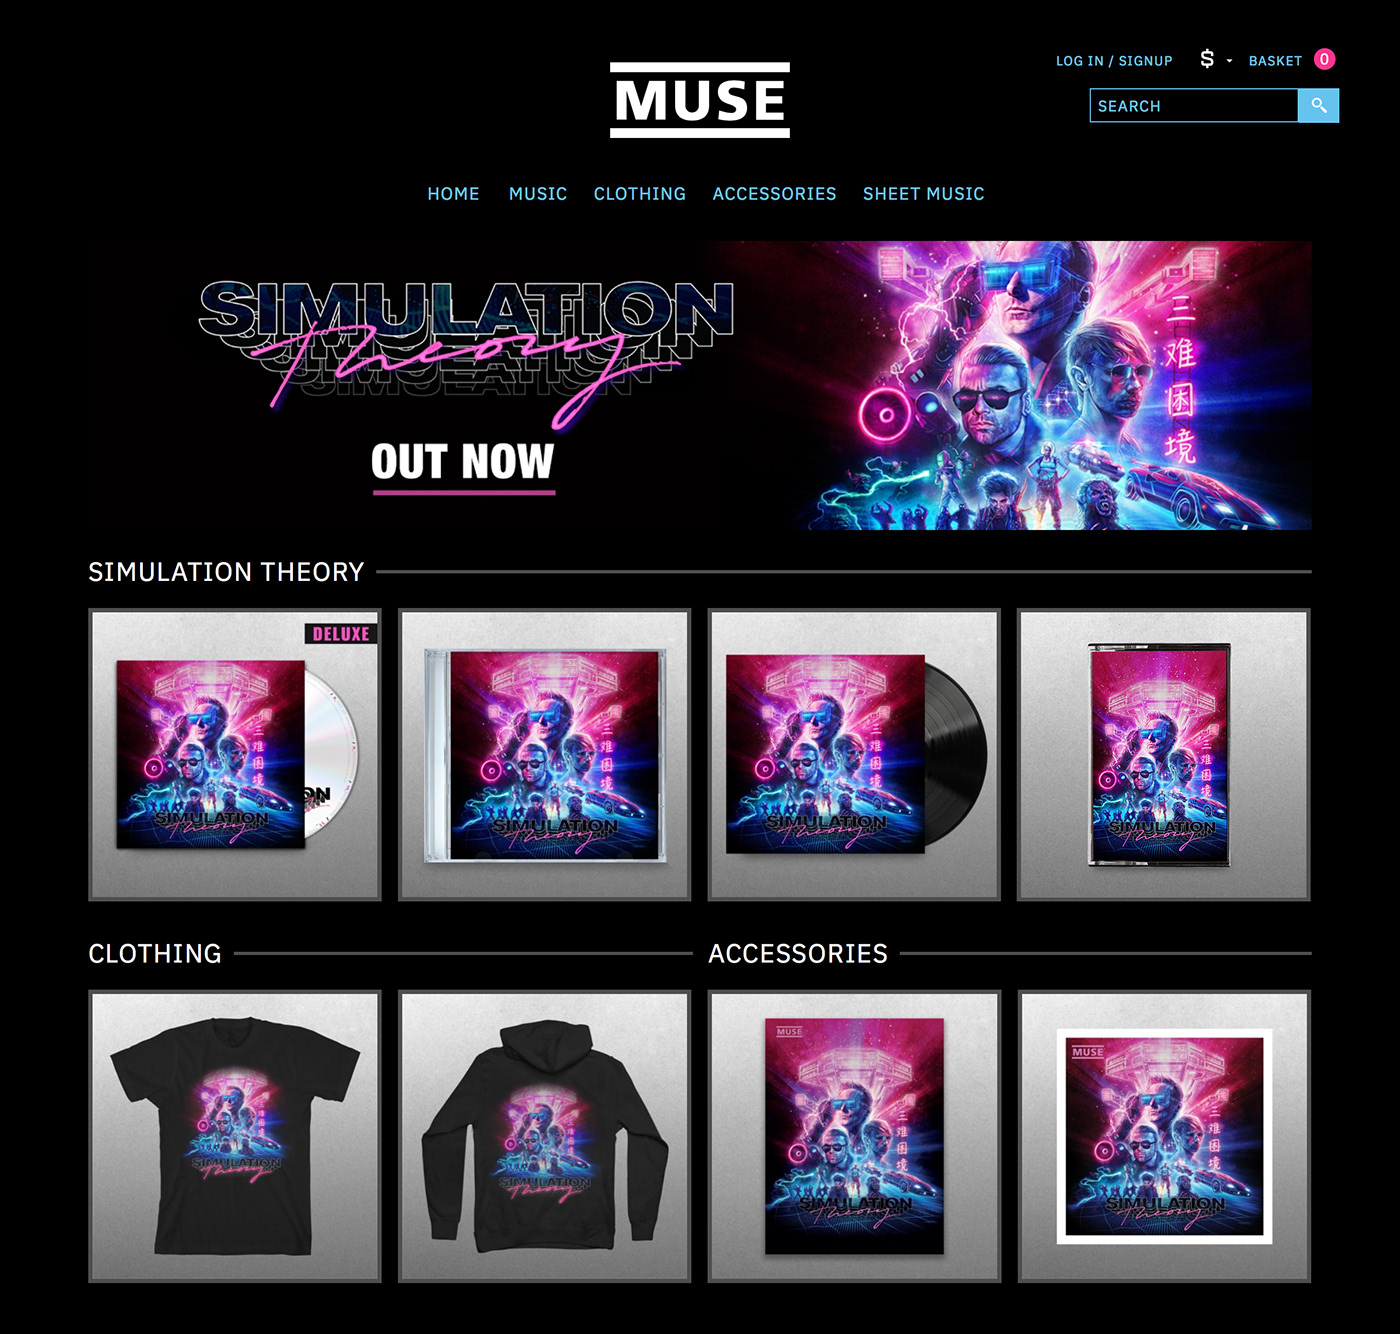 I was contacted by Muse to create an illustrated album cover for their new ...